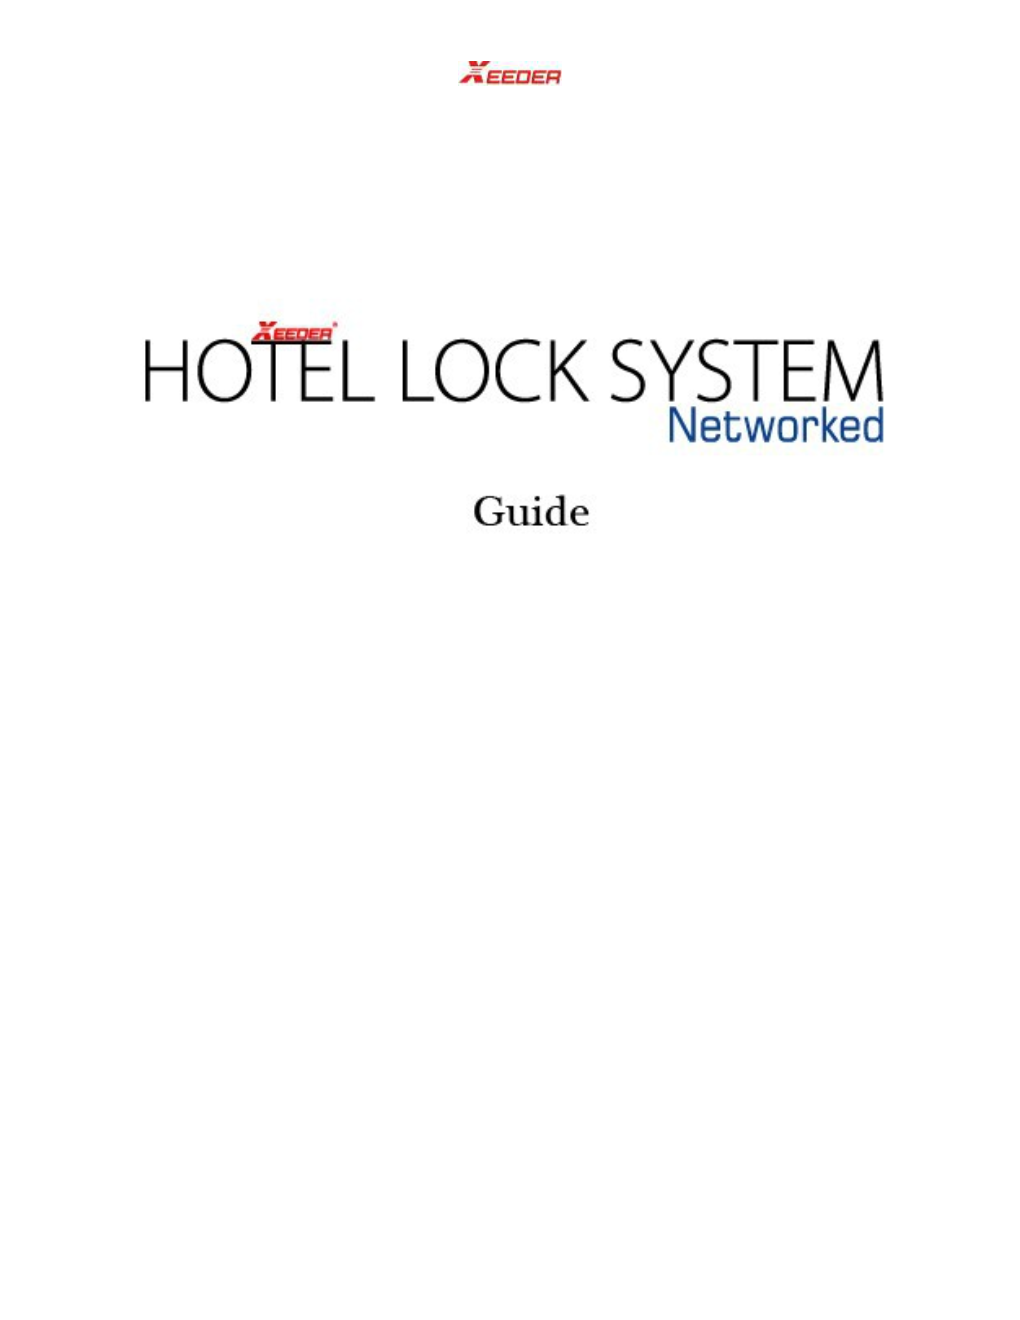 1 XEEDER Hotel Lock System Networked Overview 3